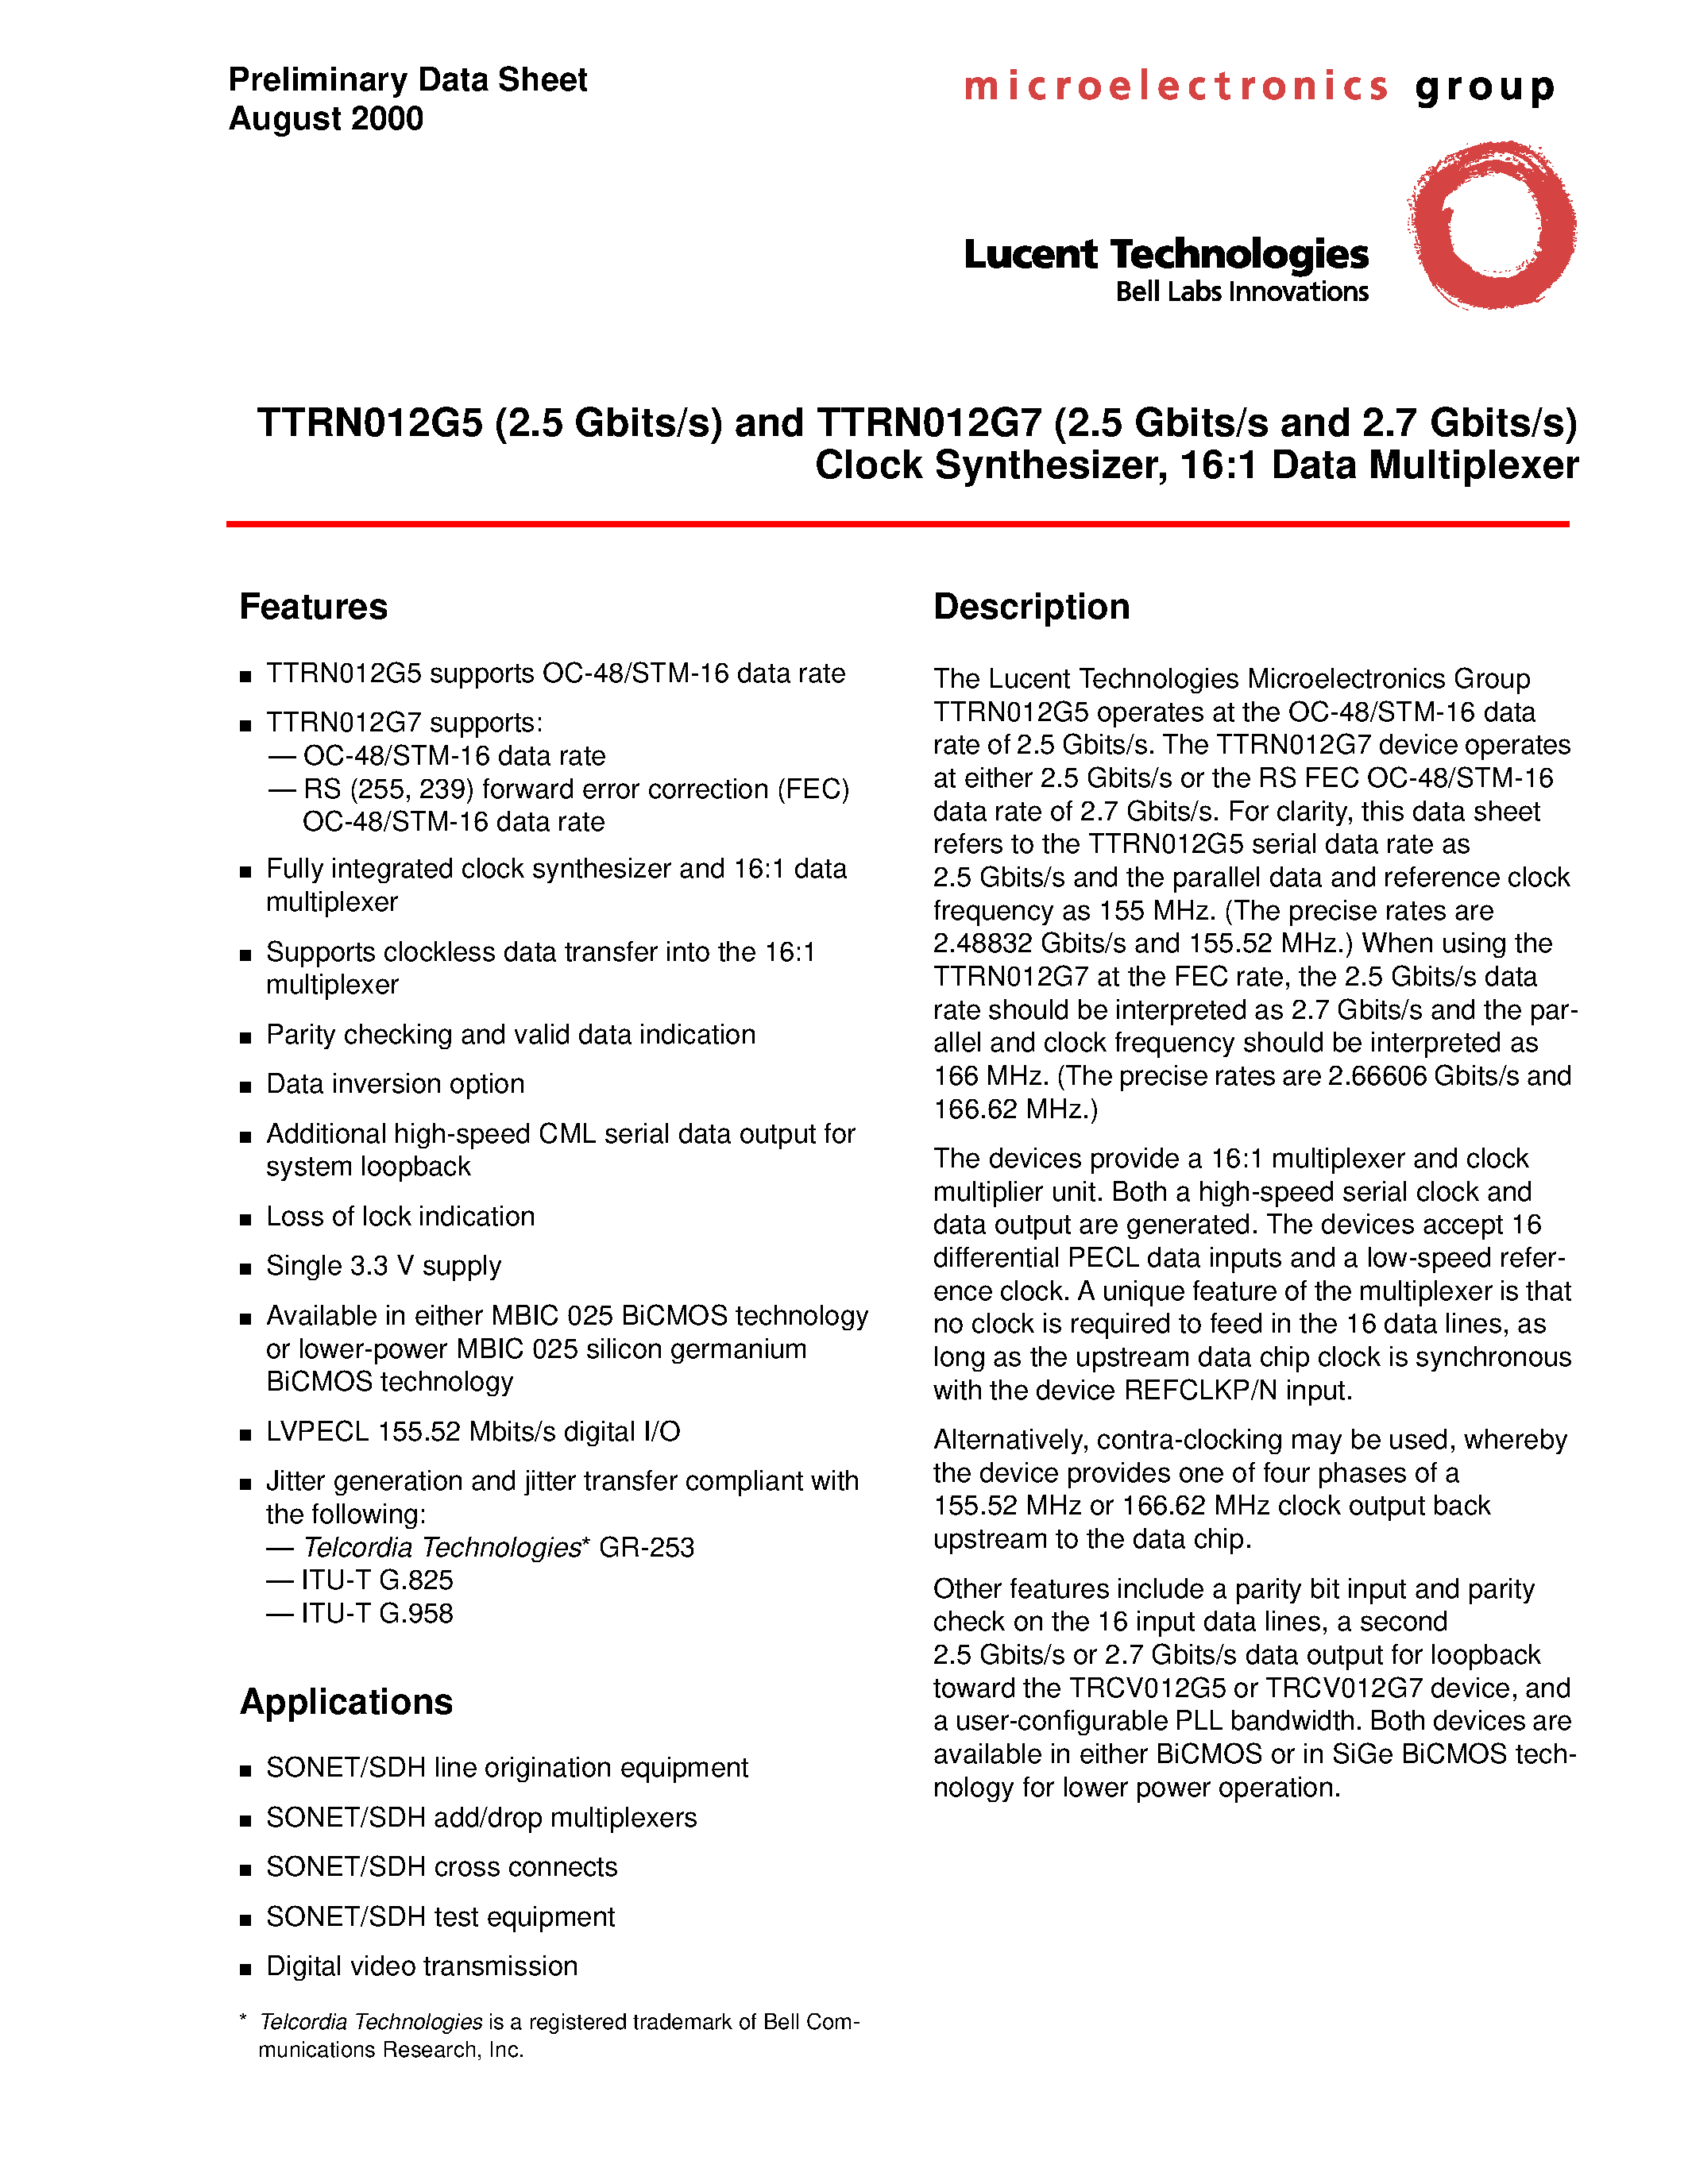 Datasheet TTRN012G53XE1 - TTRN012G5 (2.5 Gbits/s) and TTRN012G7 (2.5 Gbits/s and 2.7 Gbits/s) Clock Synthesizer/ 16:1 Data Multiplexer page 1